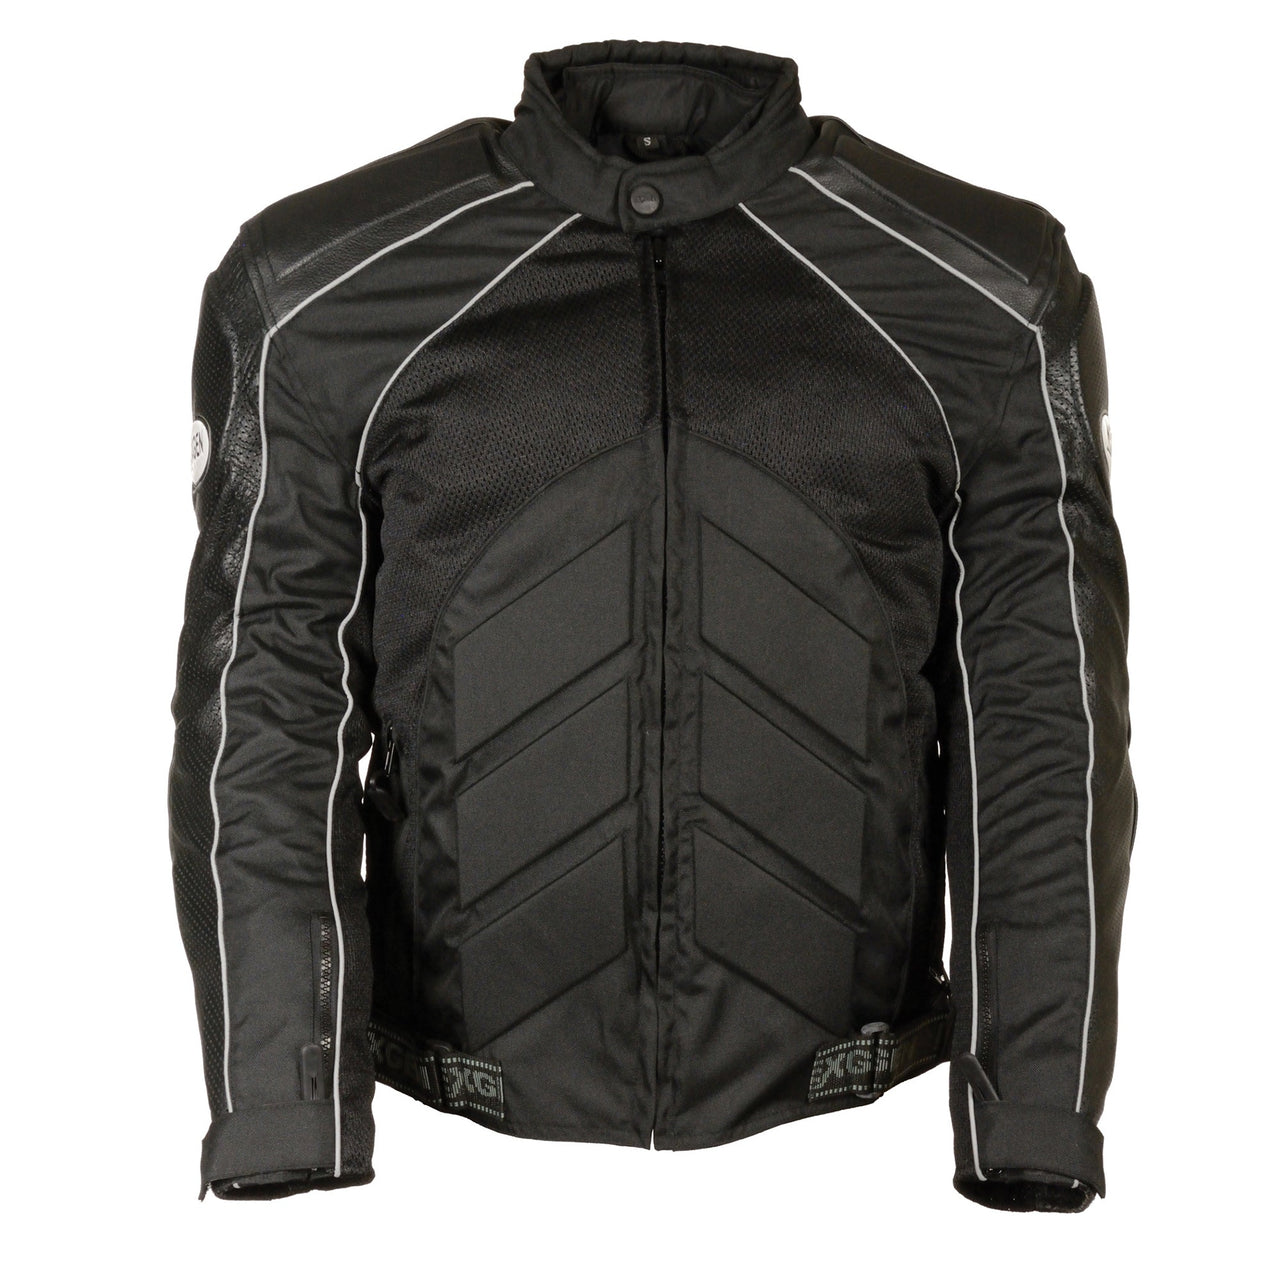 Men's Combo Leather/Textile/Mesh Racer Jacket - HighwayLeather